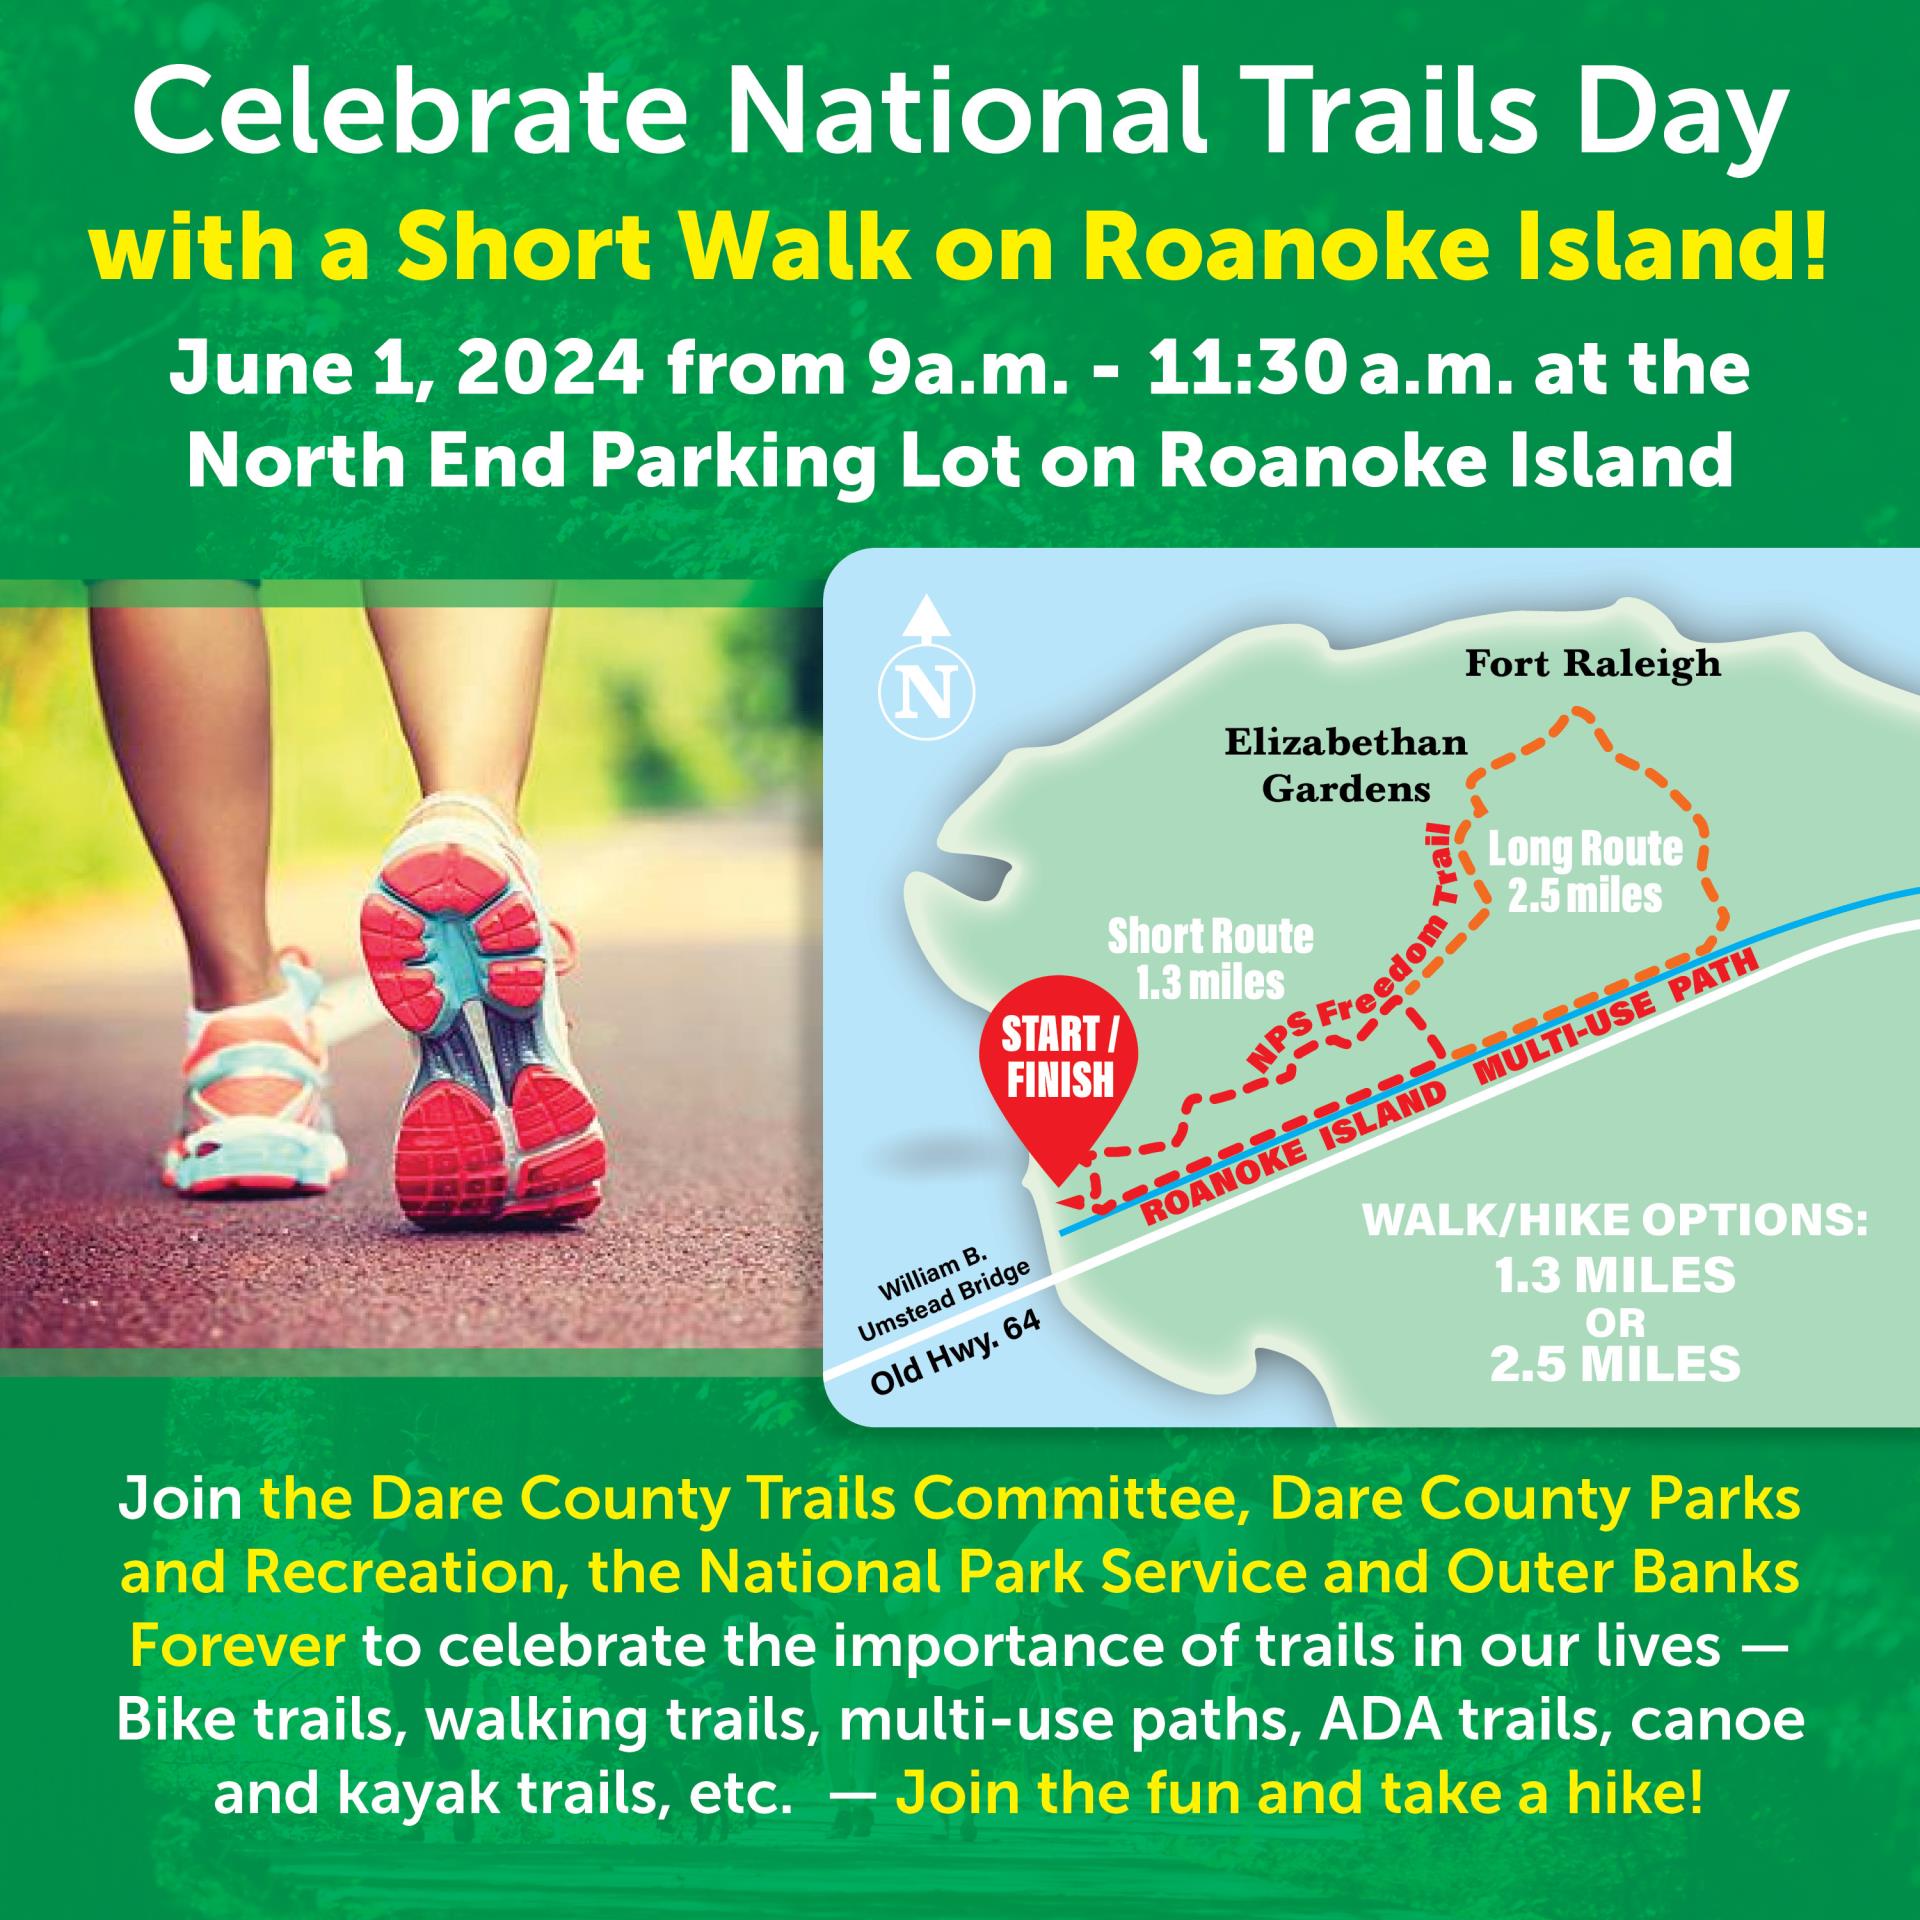 Celebrate National Trails Day with short walk on Roanoke Island | June 1, 2024 9 a.m. to 11:30 a.m. at the North End Parking Lot on Roanoke Island. Hosted by Dare County Trails Committee, Parks & Rec., NPS and OBX Forever to celebrate importance of trails in our lives! Image of a trail map.